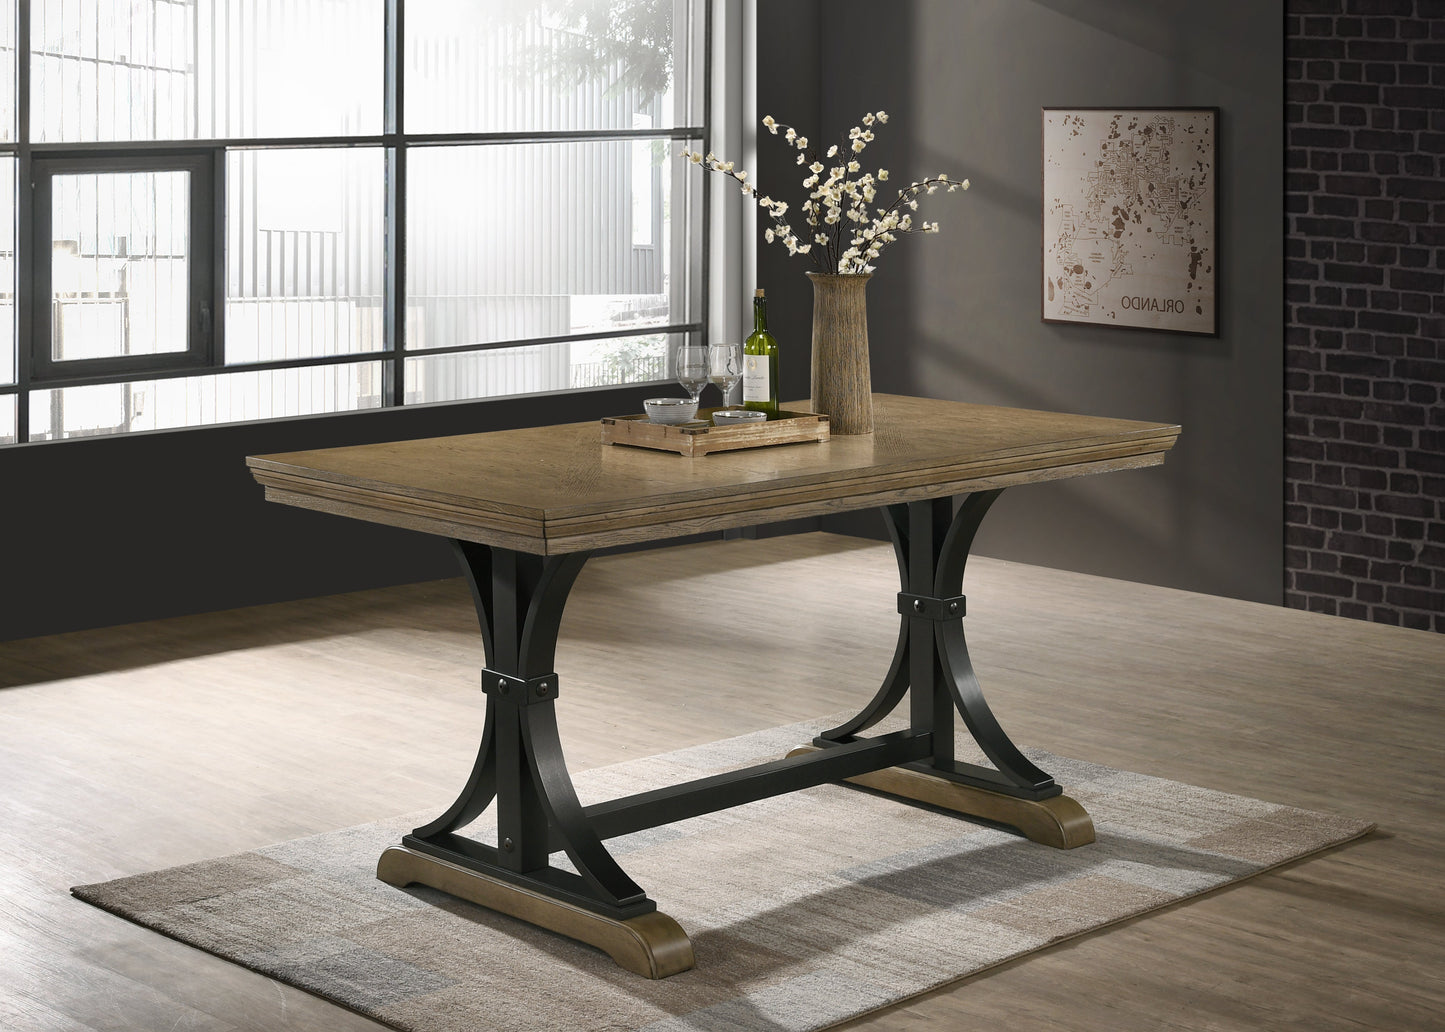 Birmingham 5-piece Driftwood Finish Table with Nail Head Chairs Counter Height Dining Set